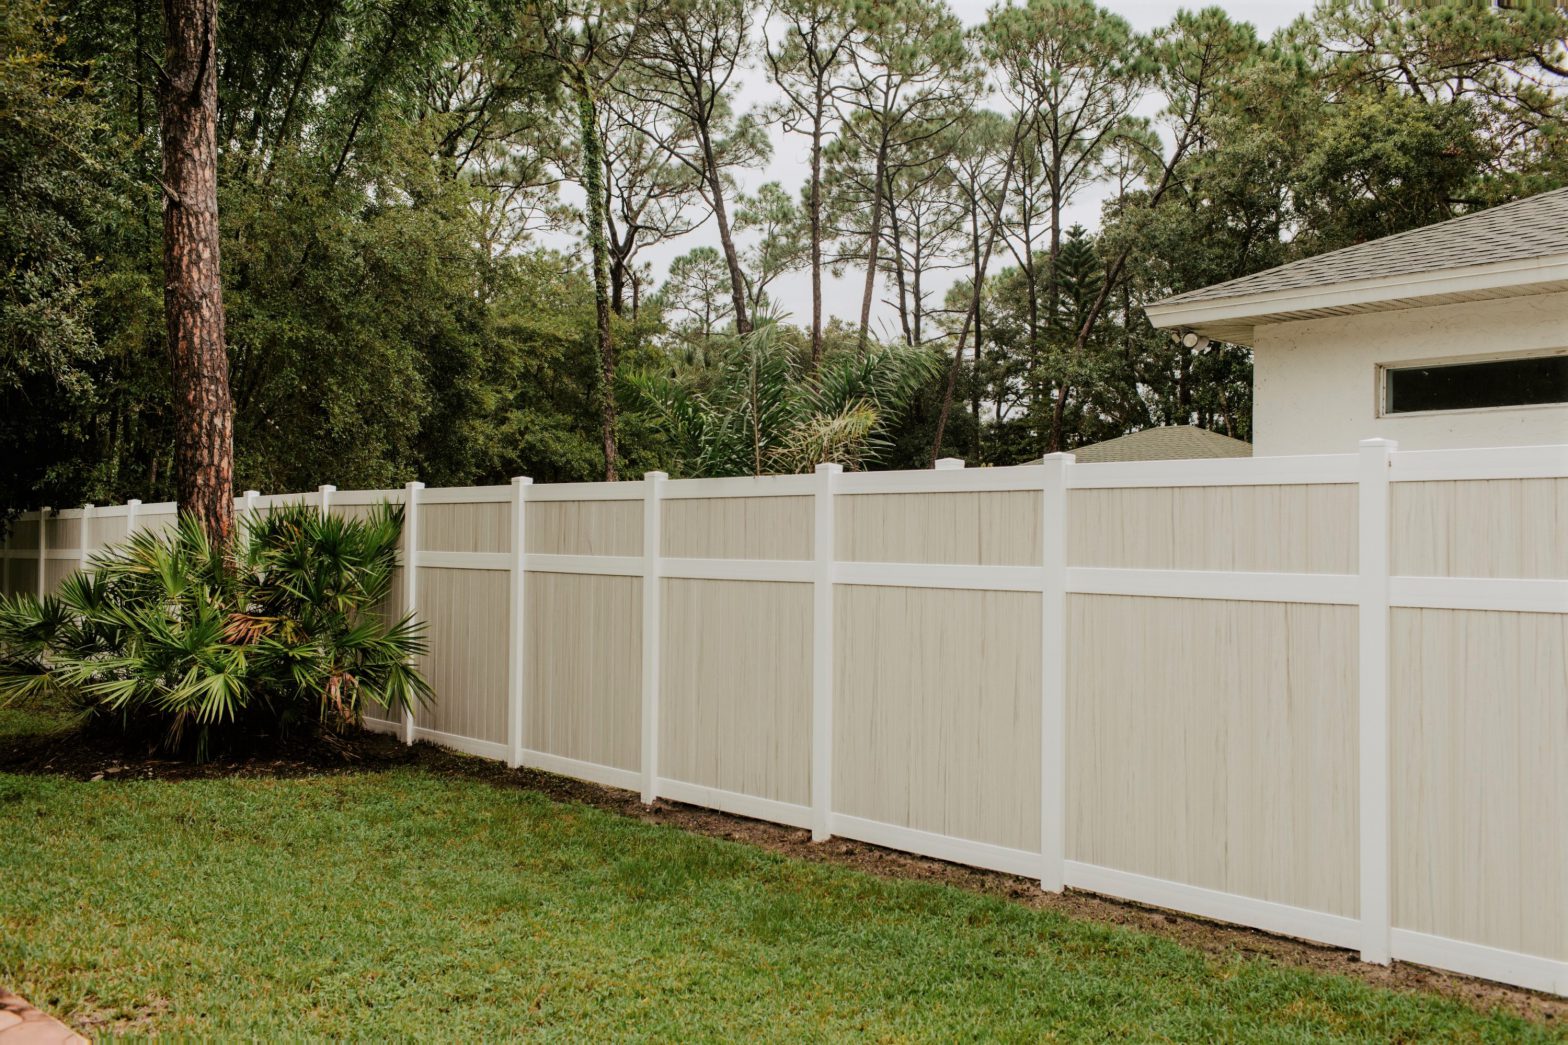 Photo of a vinyl fence that is tan and white